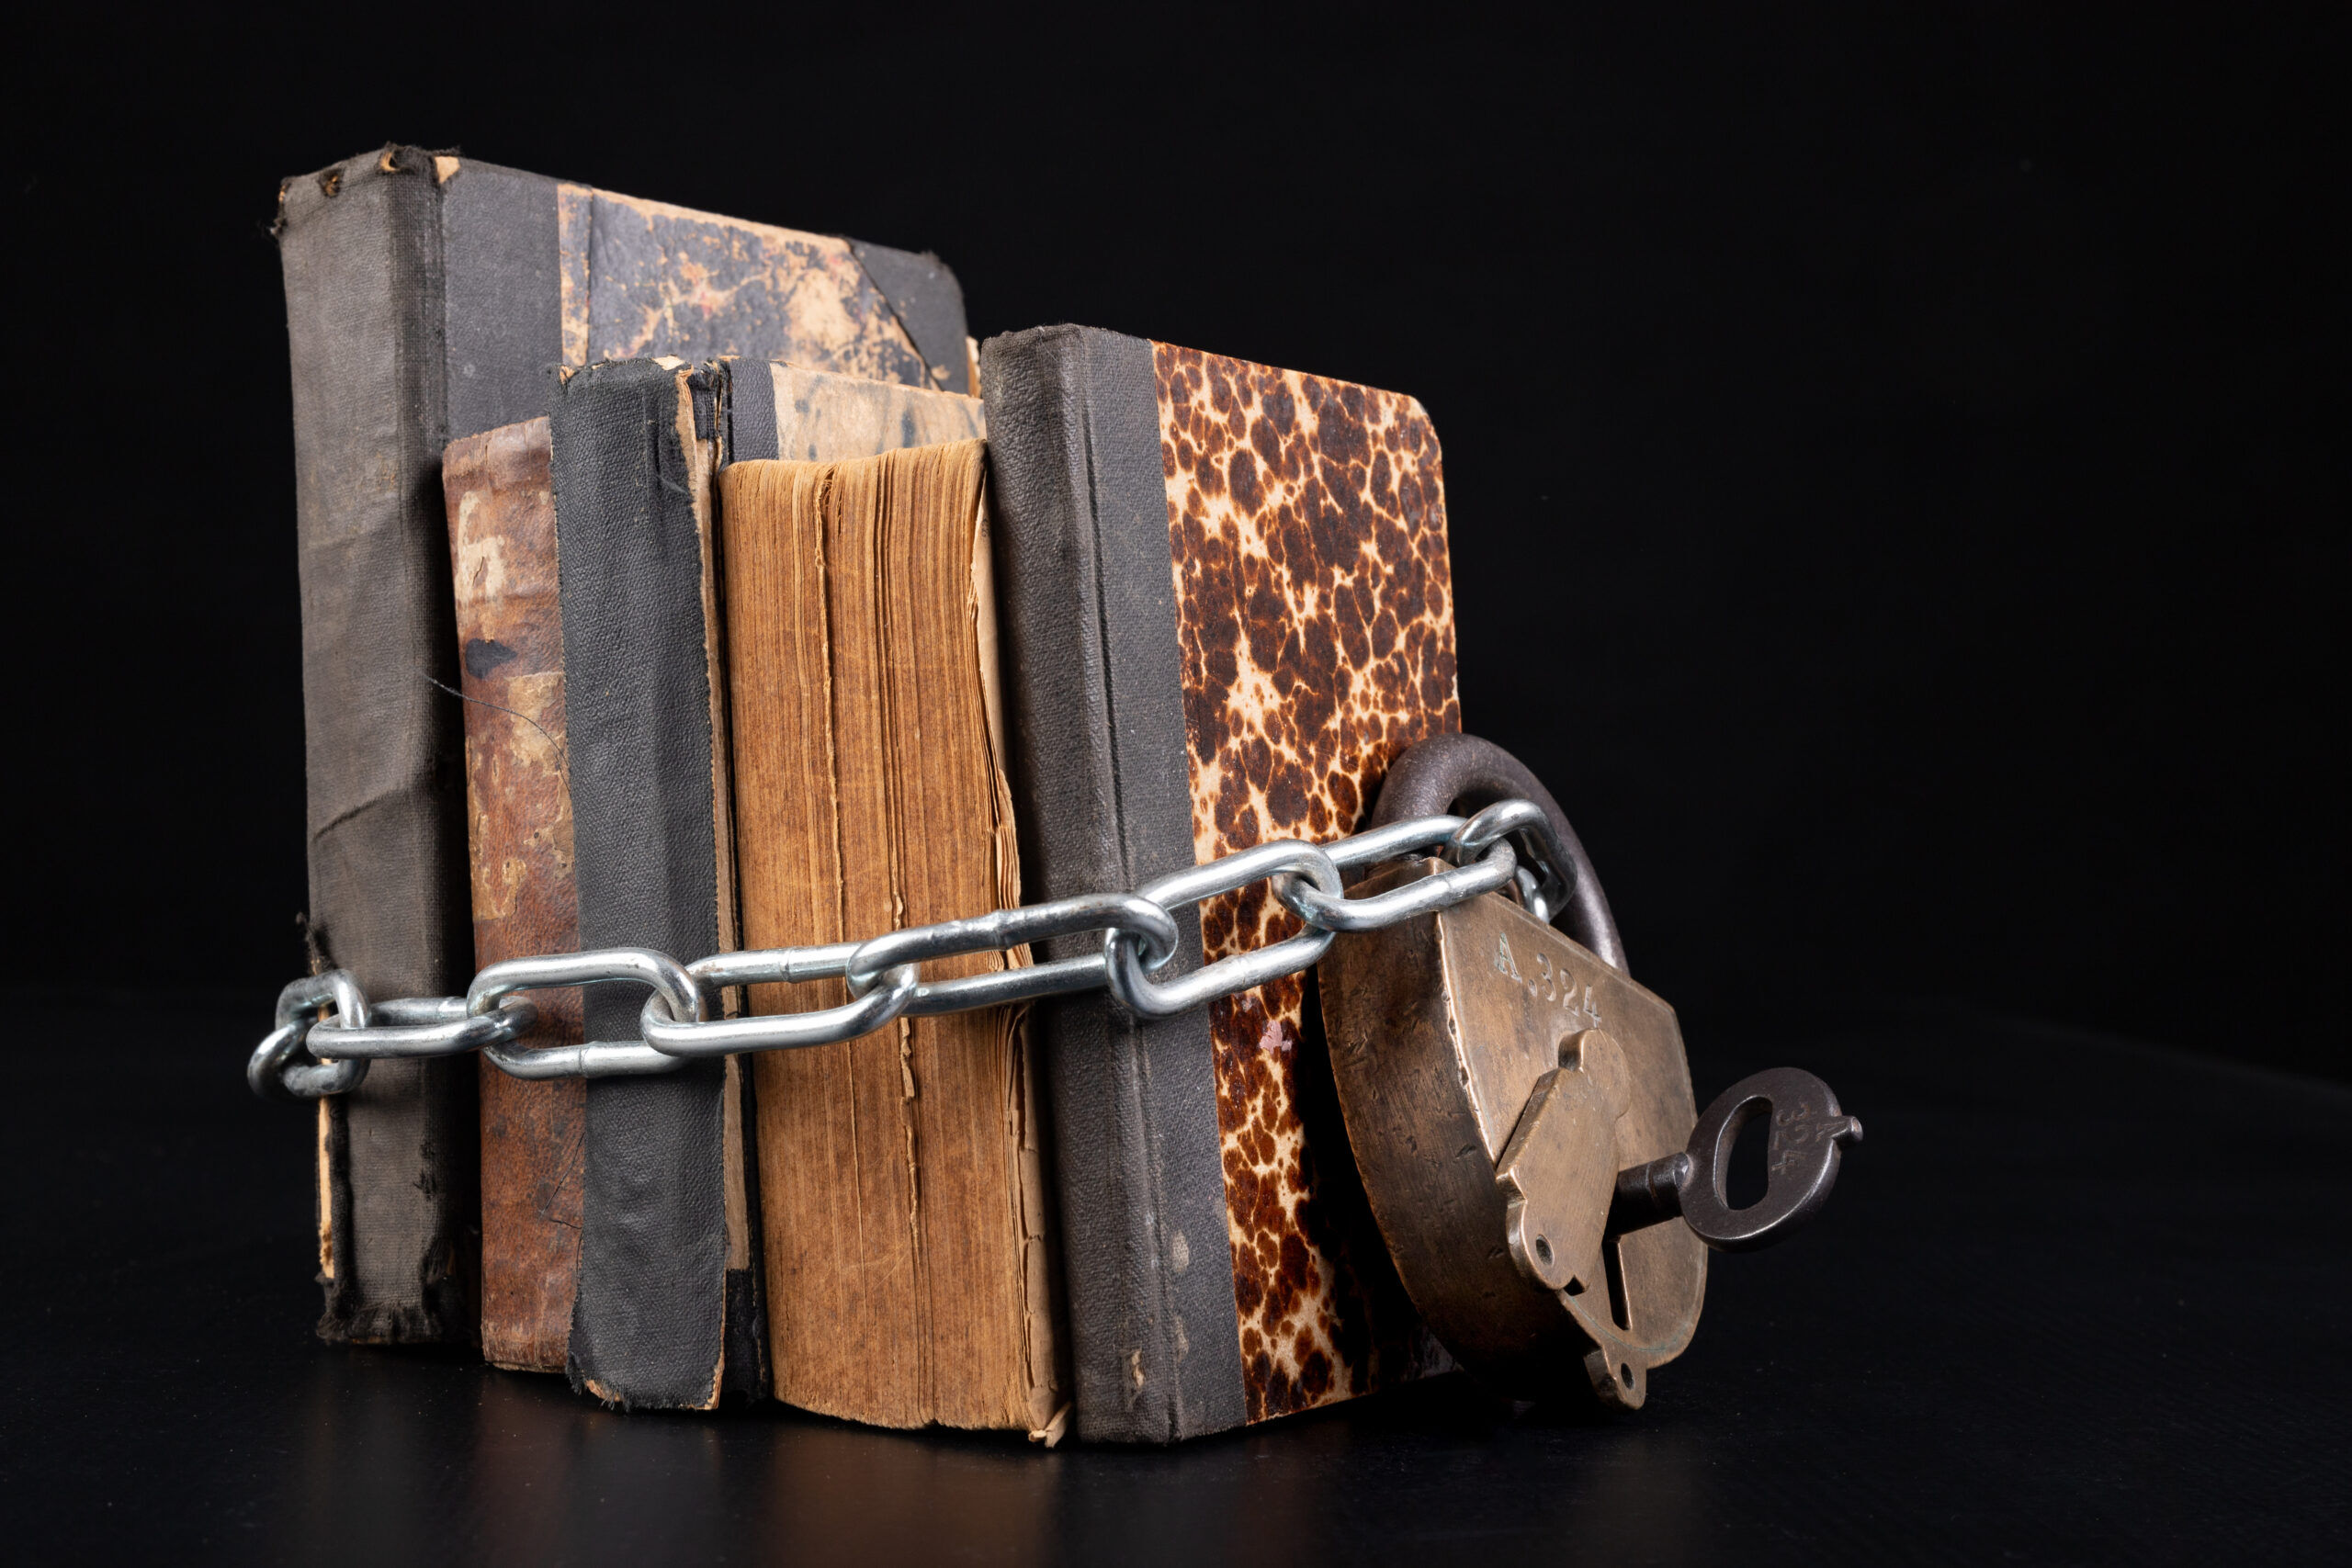 Old books strapping a shiny chain. Forbidden literature locked with a padlock. Dark background.